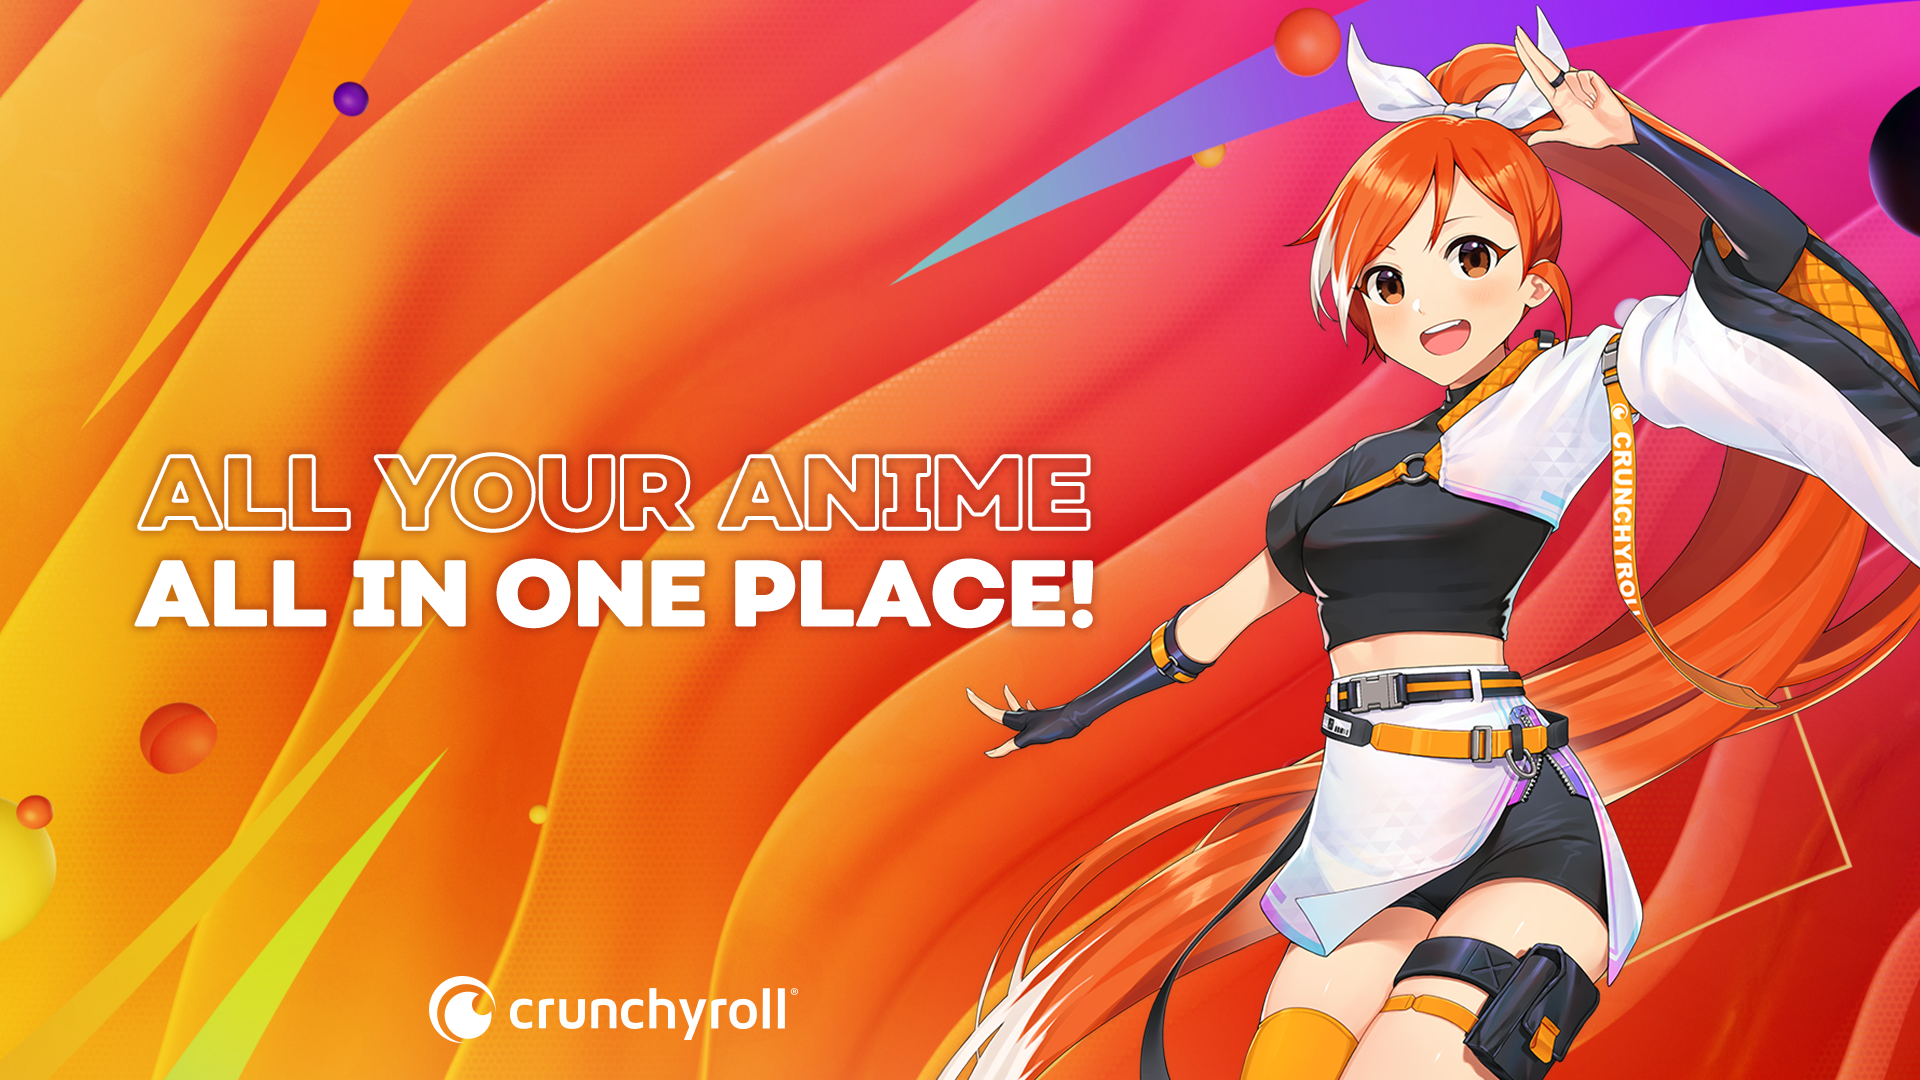 Crunchyroll to Require Premium Subscription for Weekly Simulcasts